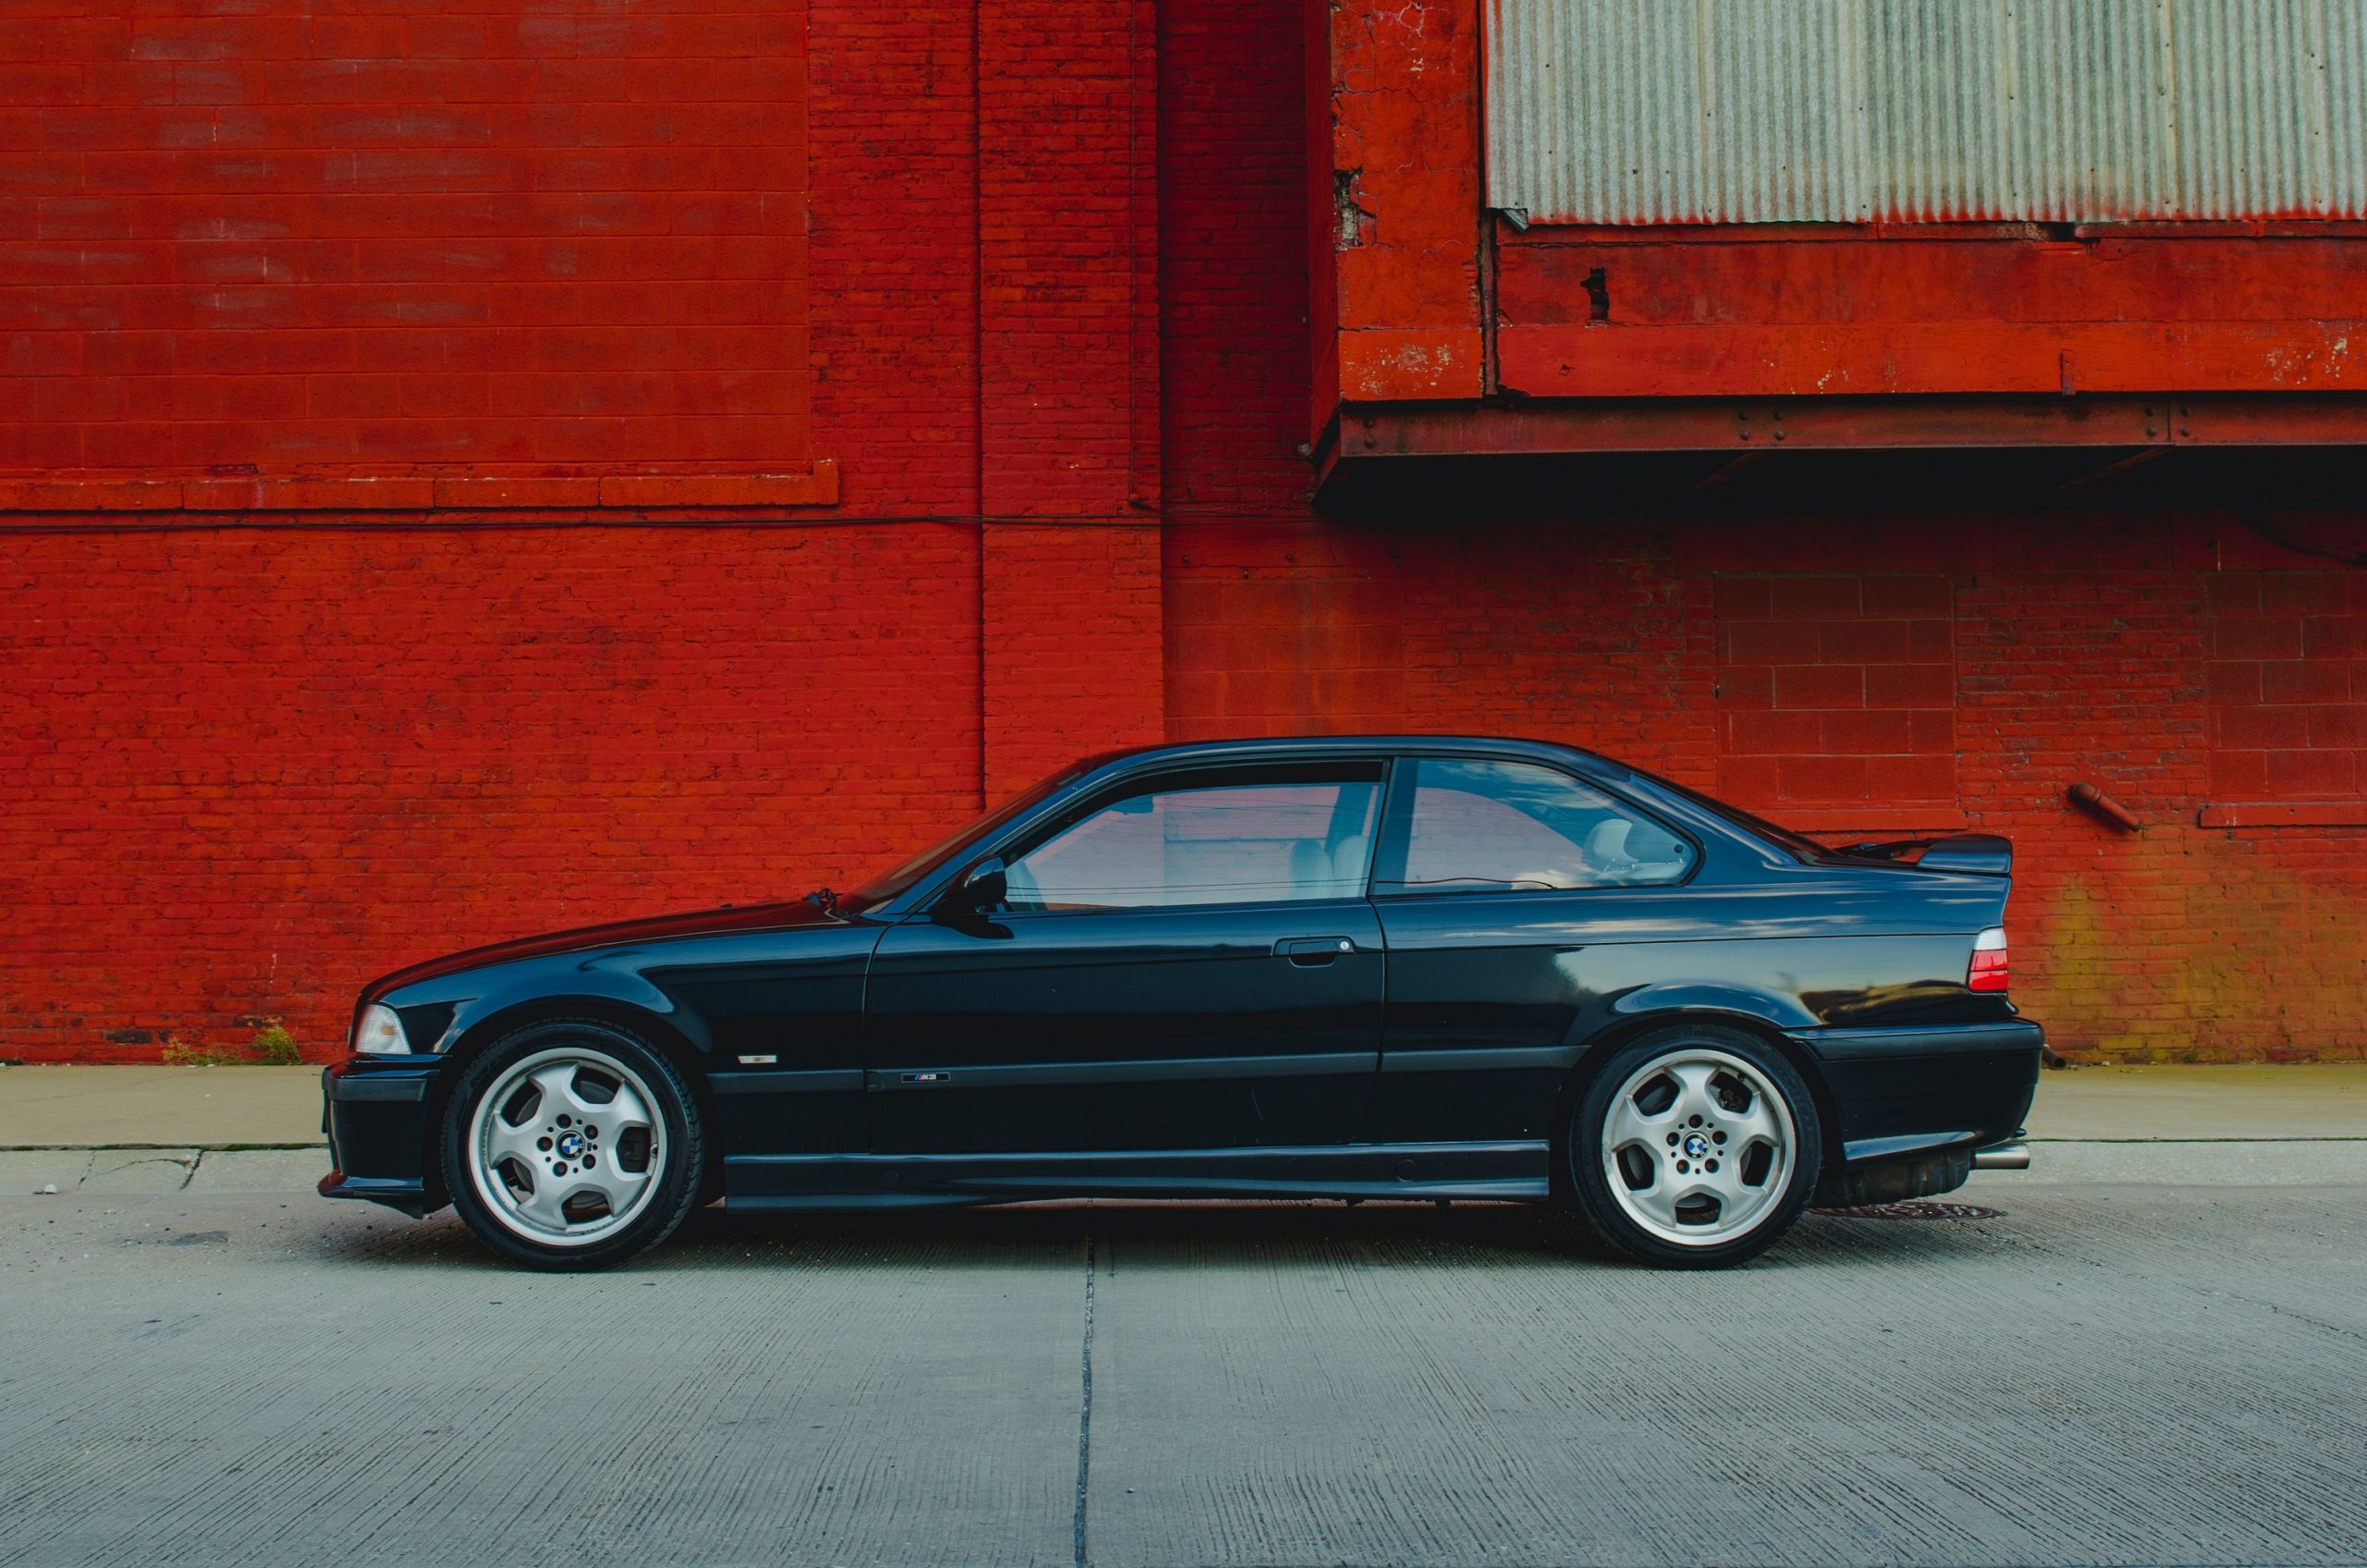 An E36 BMW M3 coupe shot in profile against a red brick wall